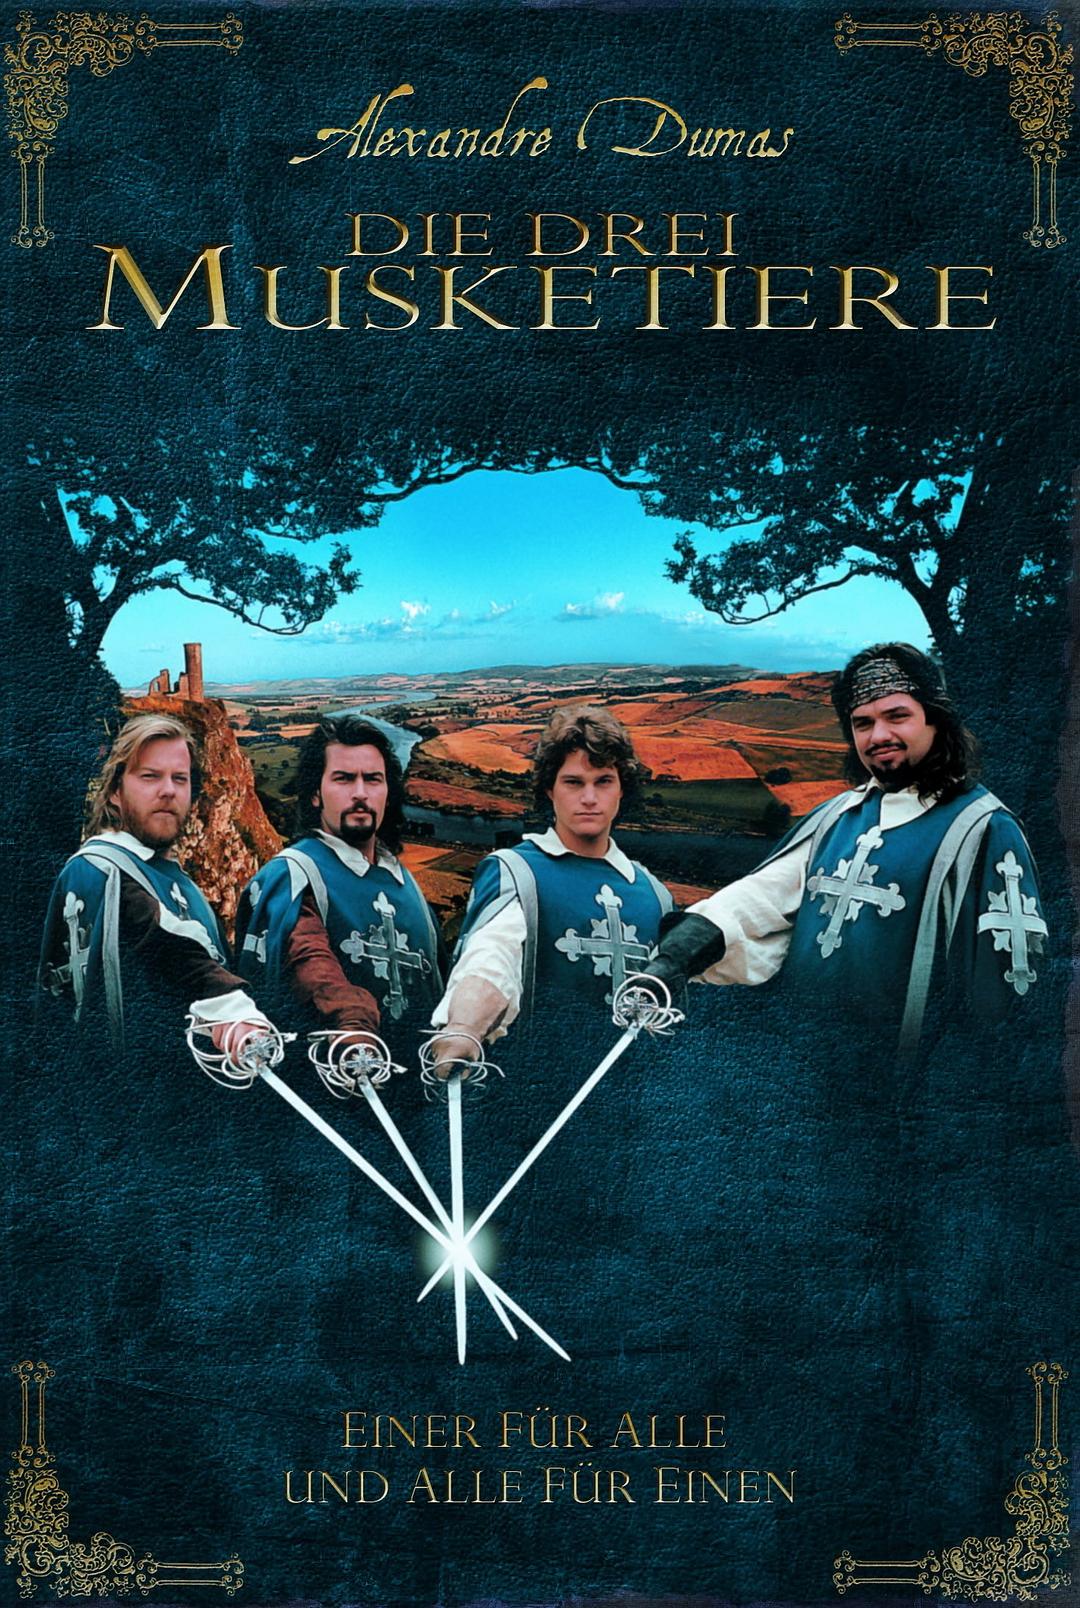 /ǹ The.Three.Musketeers.1993.1080p.BluRay.X264-AMIABLE 10.94GB-1.png